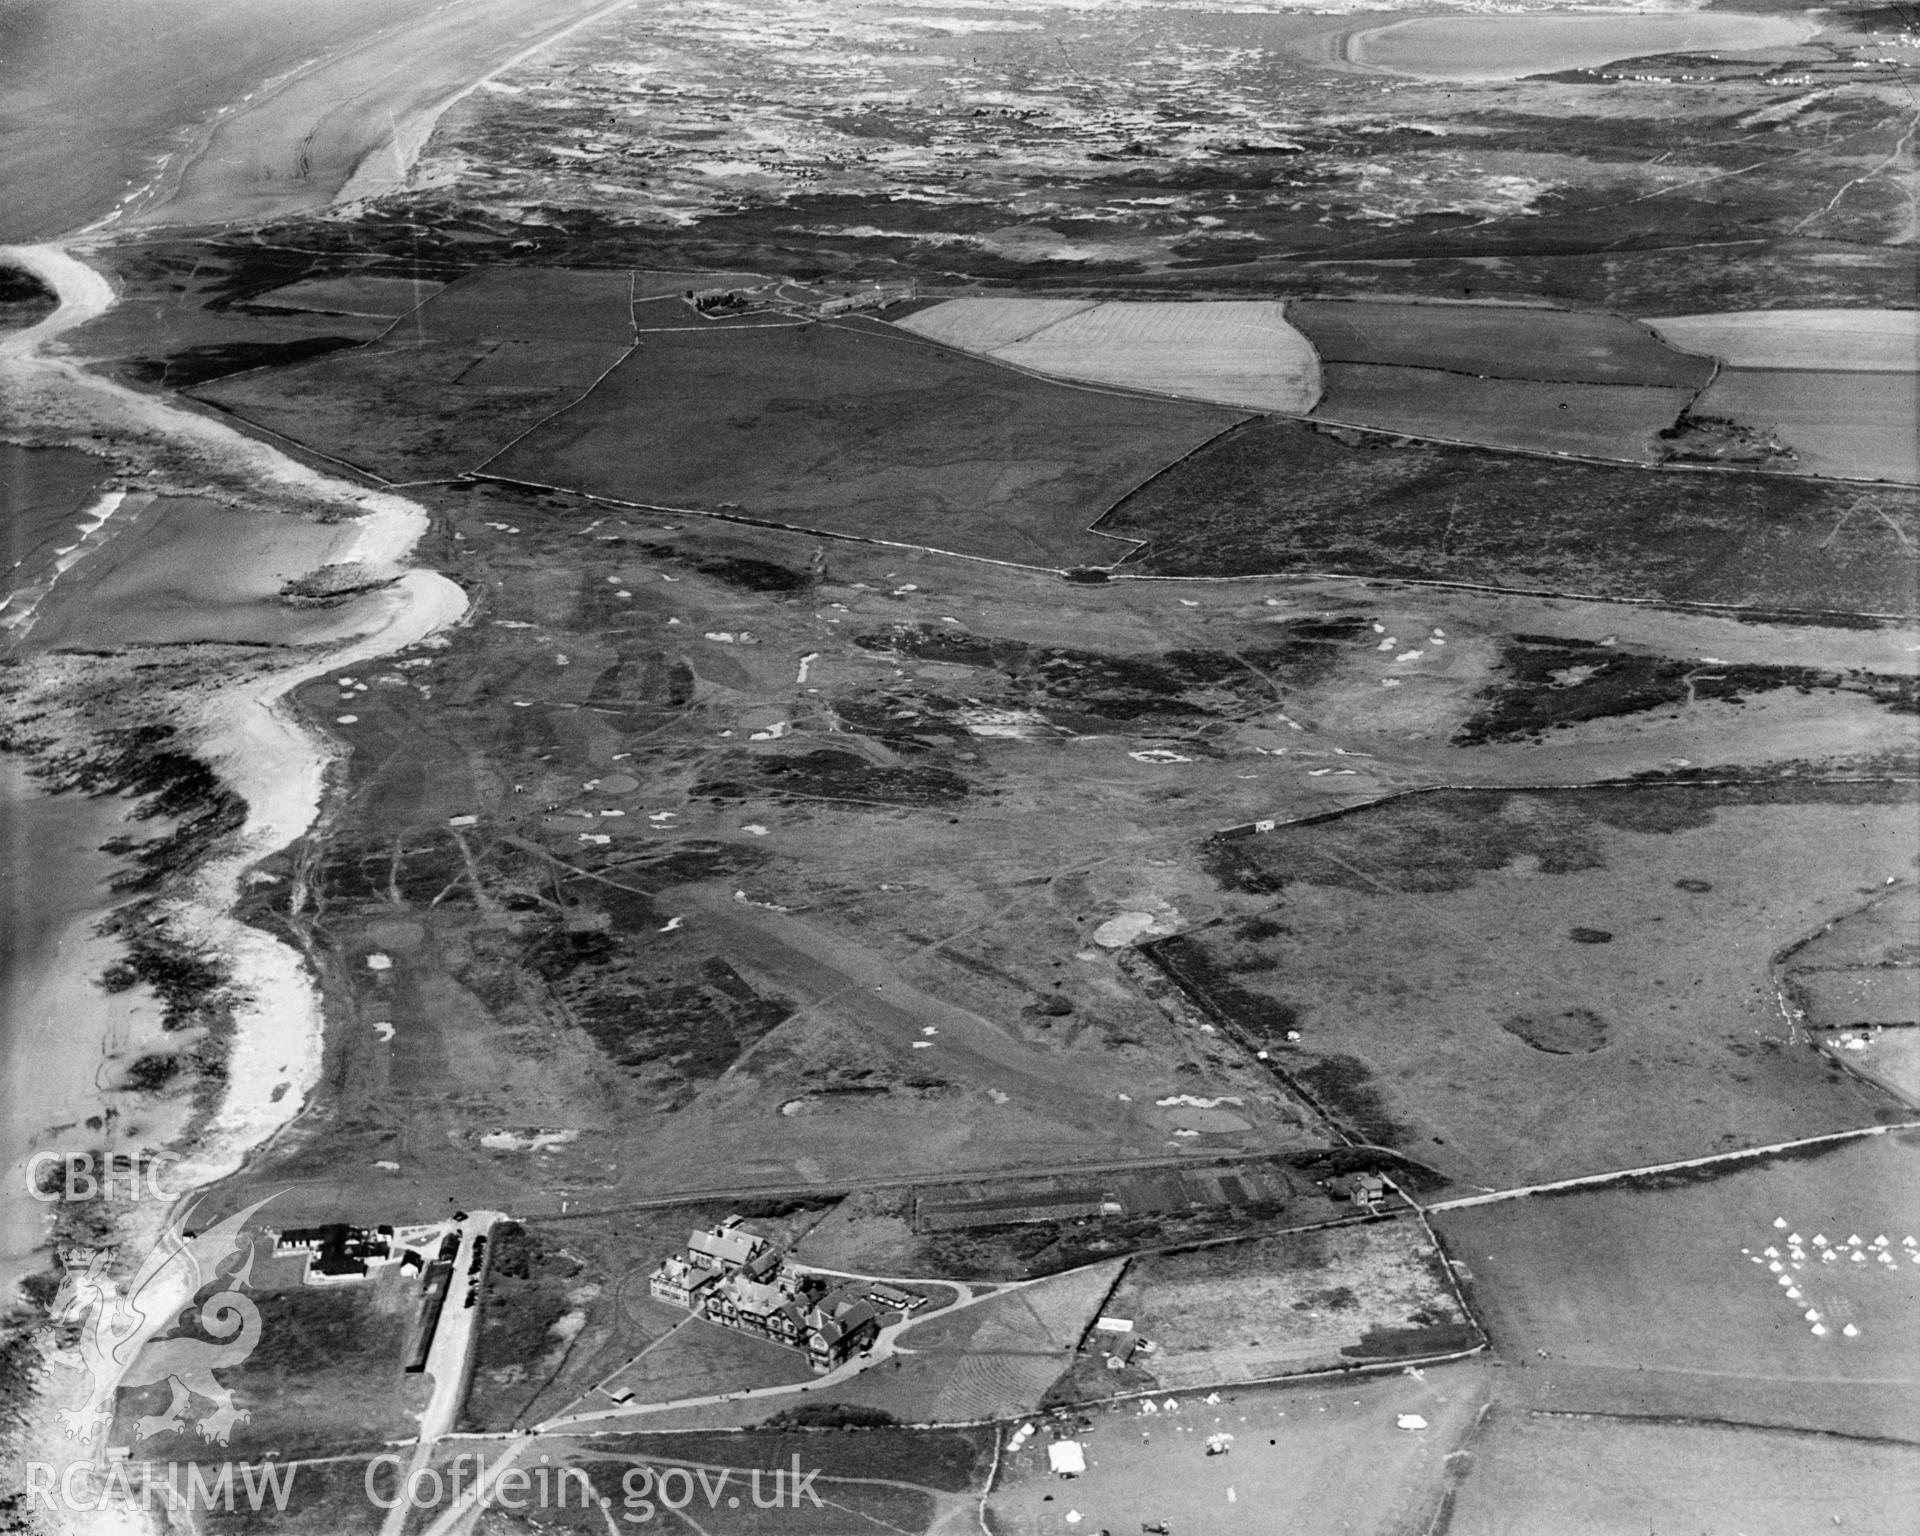 View of Royal Porthcawl golf couse and clubhouse, oblique aerial view. 5?x4? black and white glass plate negative.